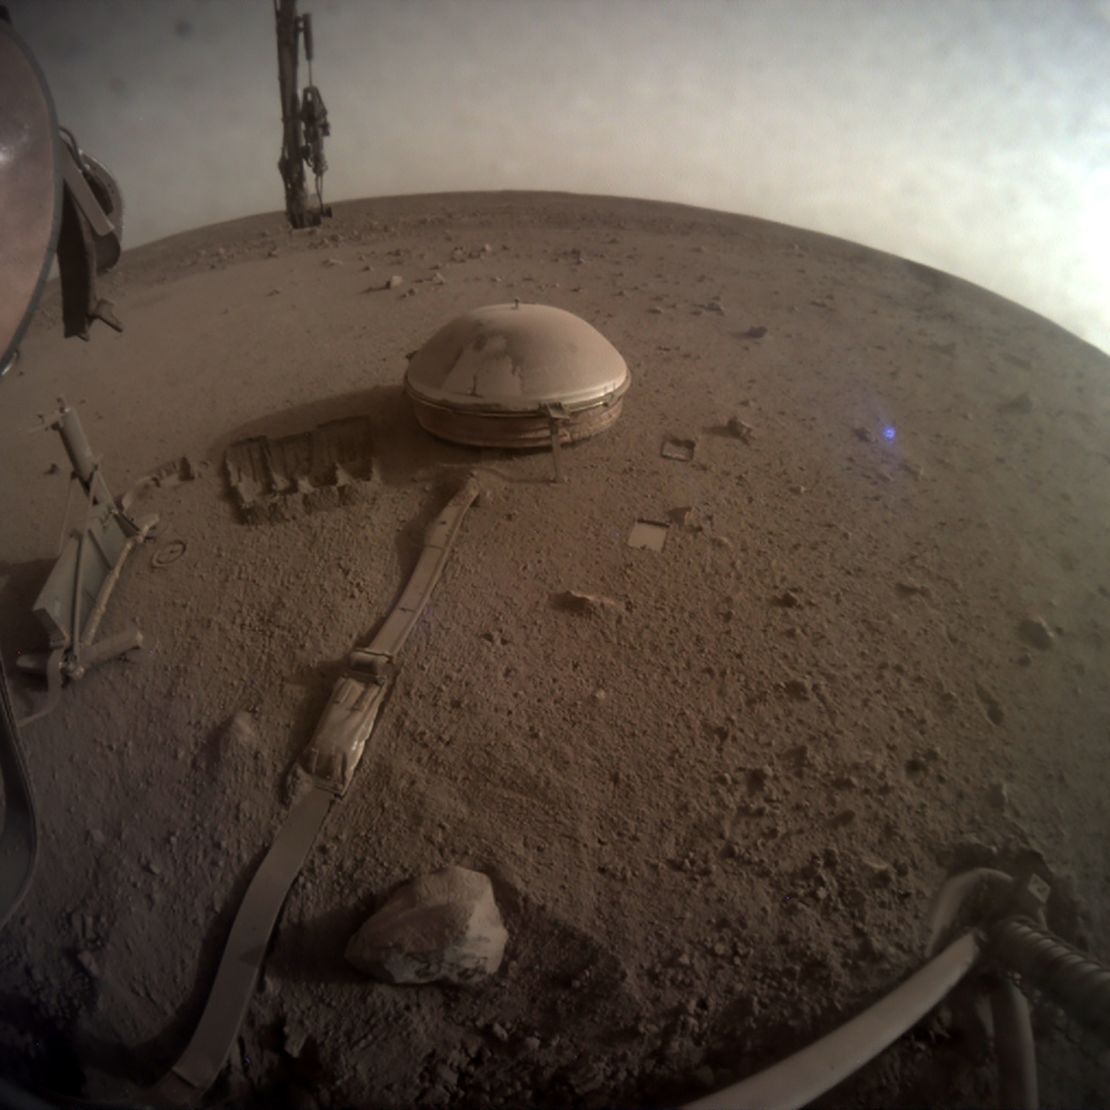 The NASA InSight lander acquired this image of the area in front of the spacecraft on Mars on December 11. 